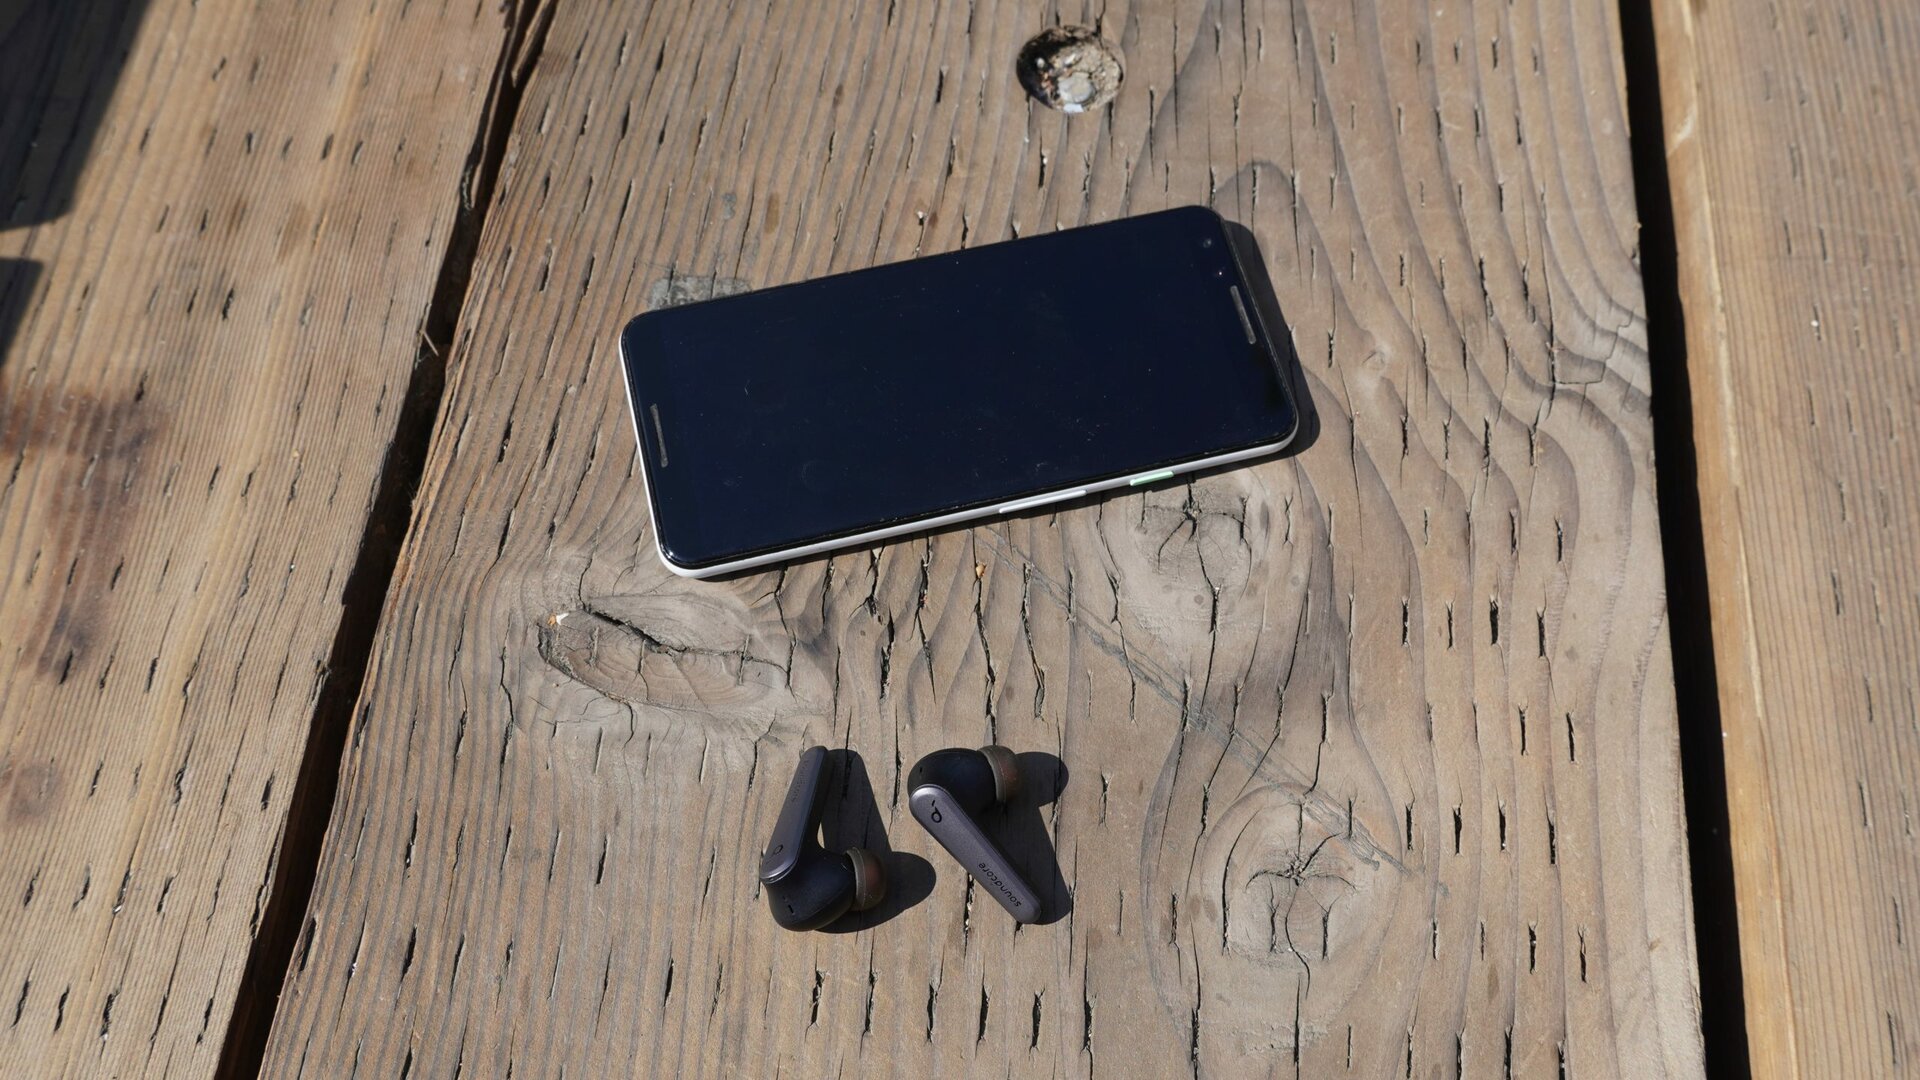 The Anker Soundcore Liberty Air 2 Pro earbuds sitting next to a smartphone outdoors on a wood surface.